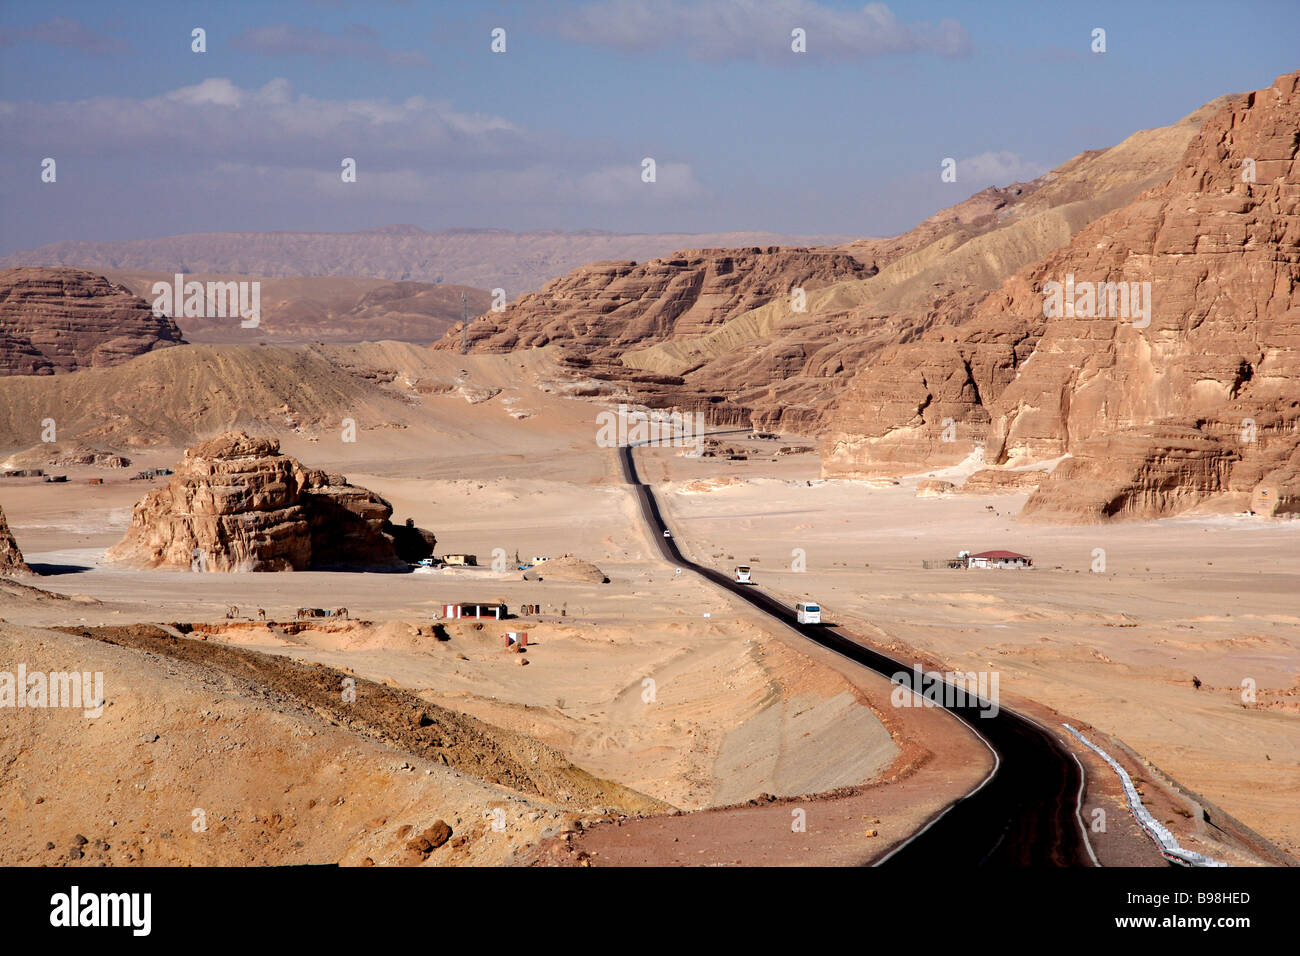 Desert road, mountains and Bedouin settlement between Sharm El Sheikh and St. Catherine's Monastery, South Sinai, Egypt Stock Photo